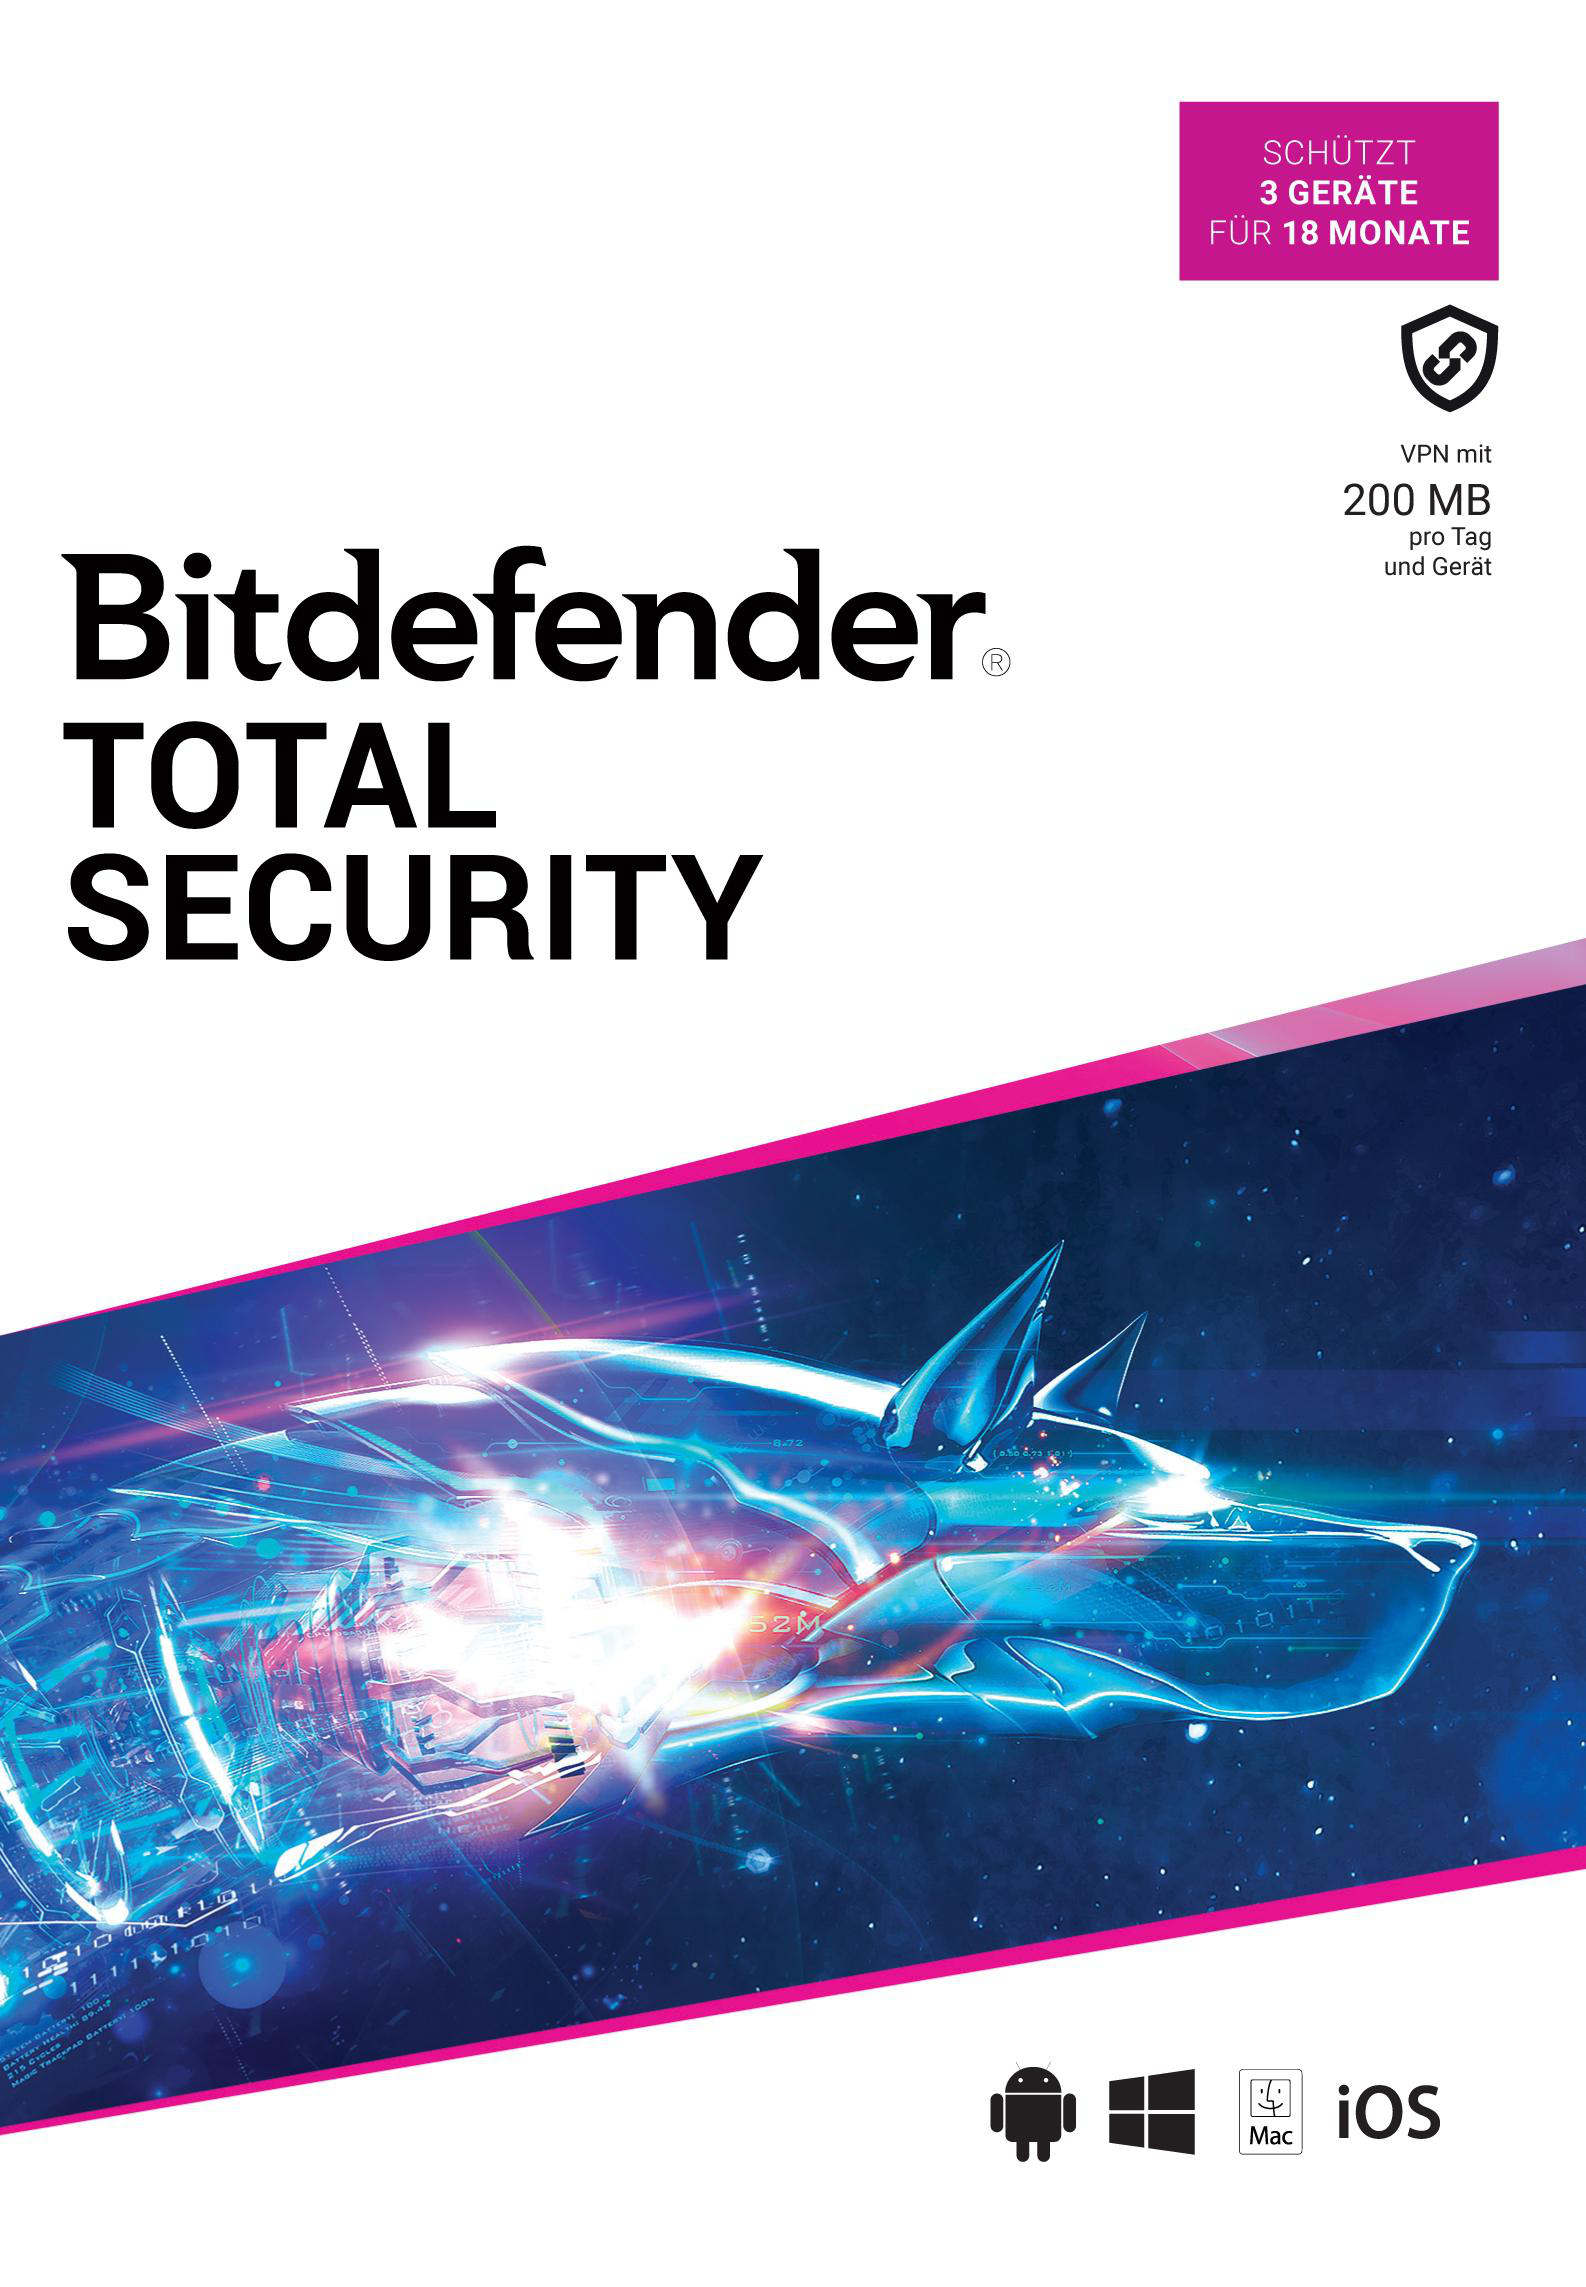 Security Box) Bitdefender [PC] 18 3 - in Monate (Code a / Geräte Total